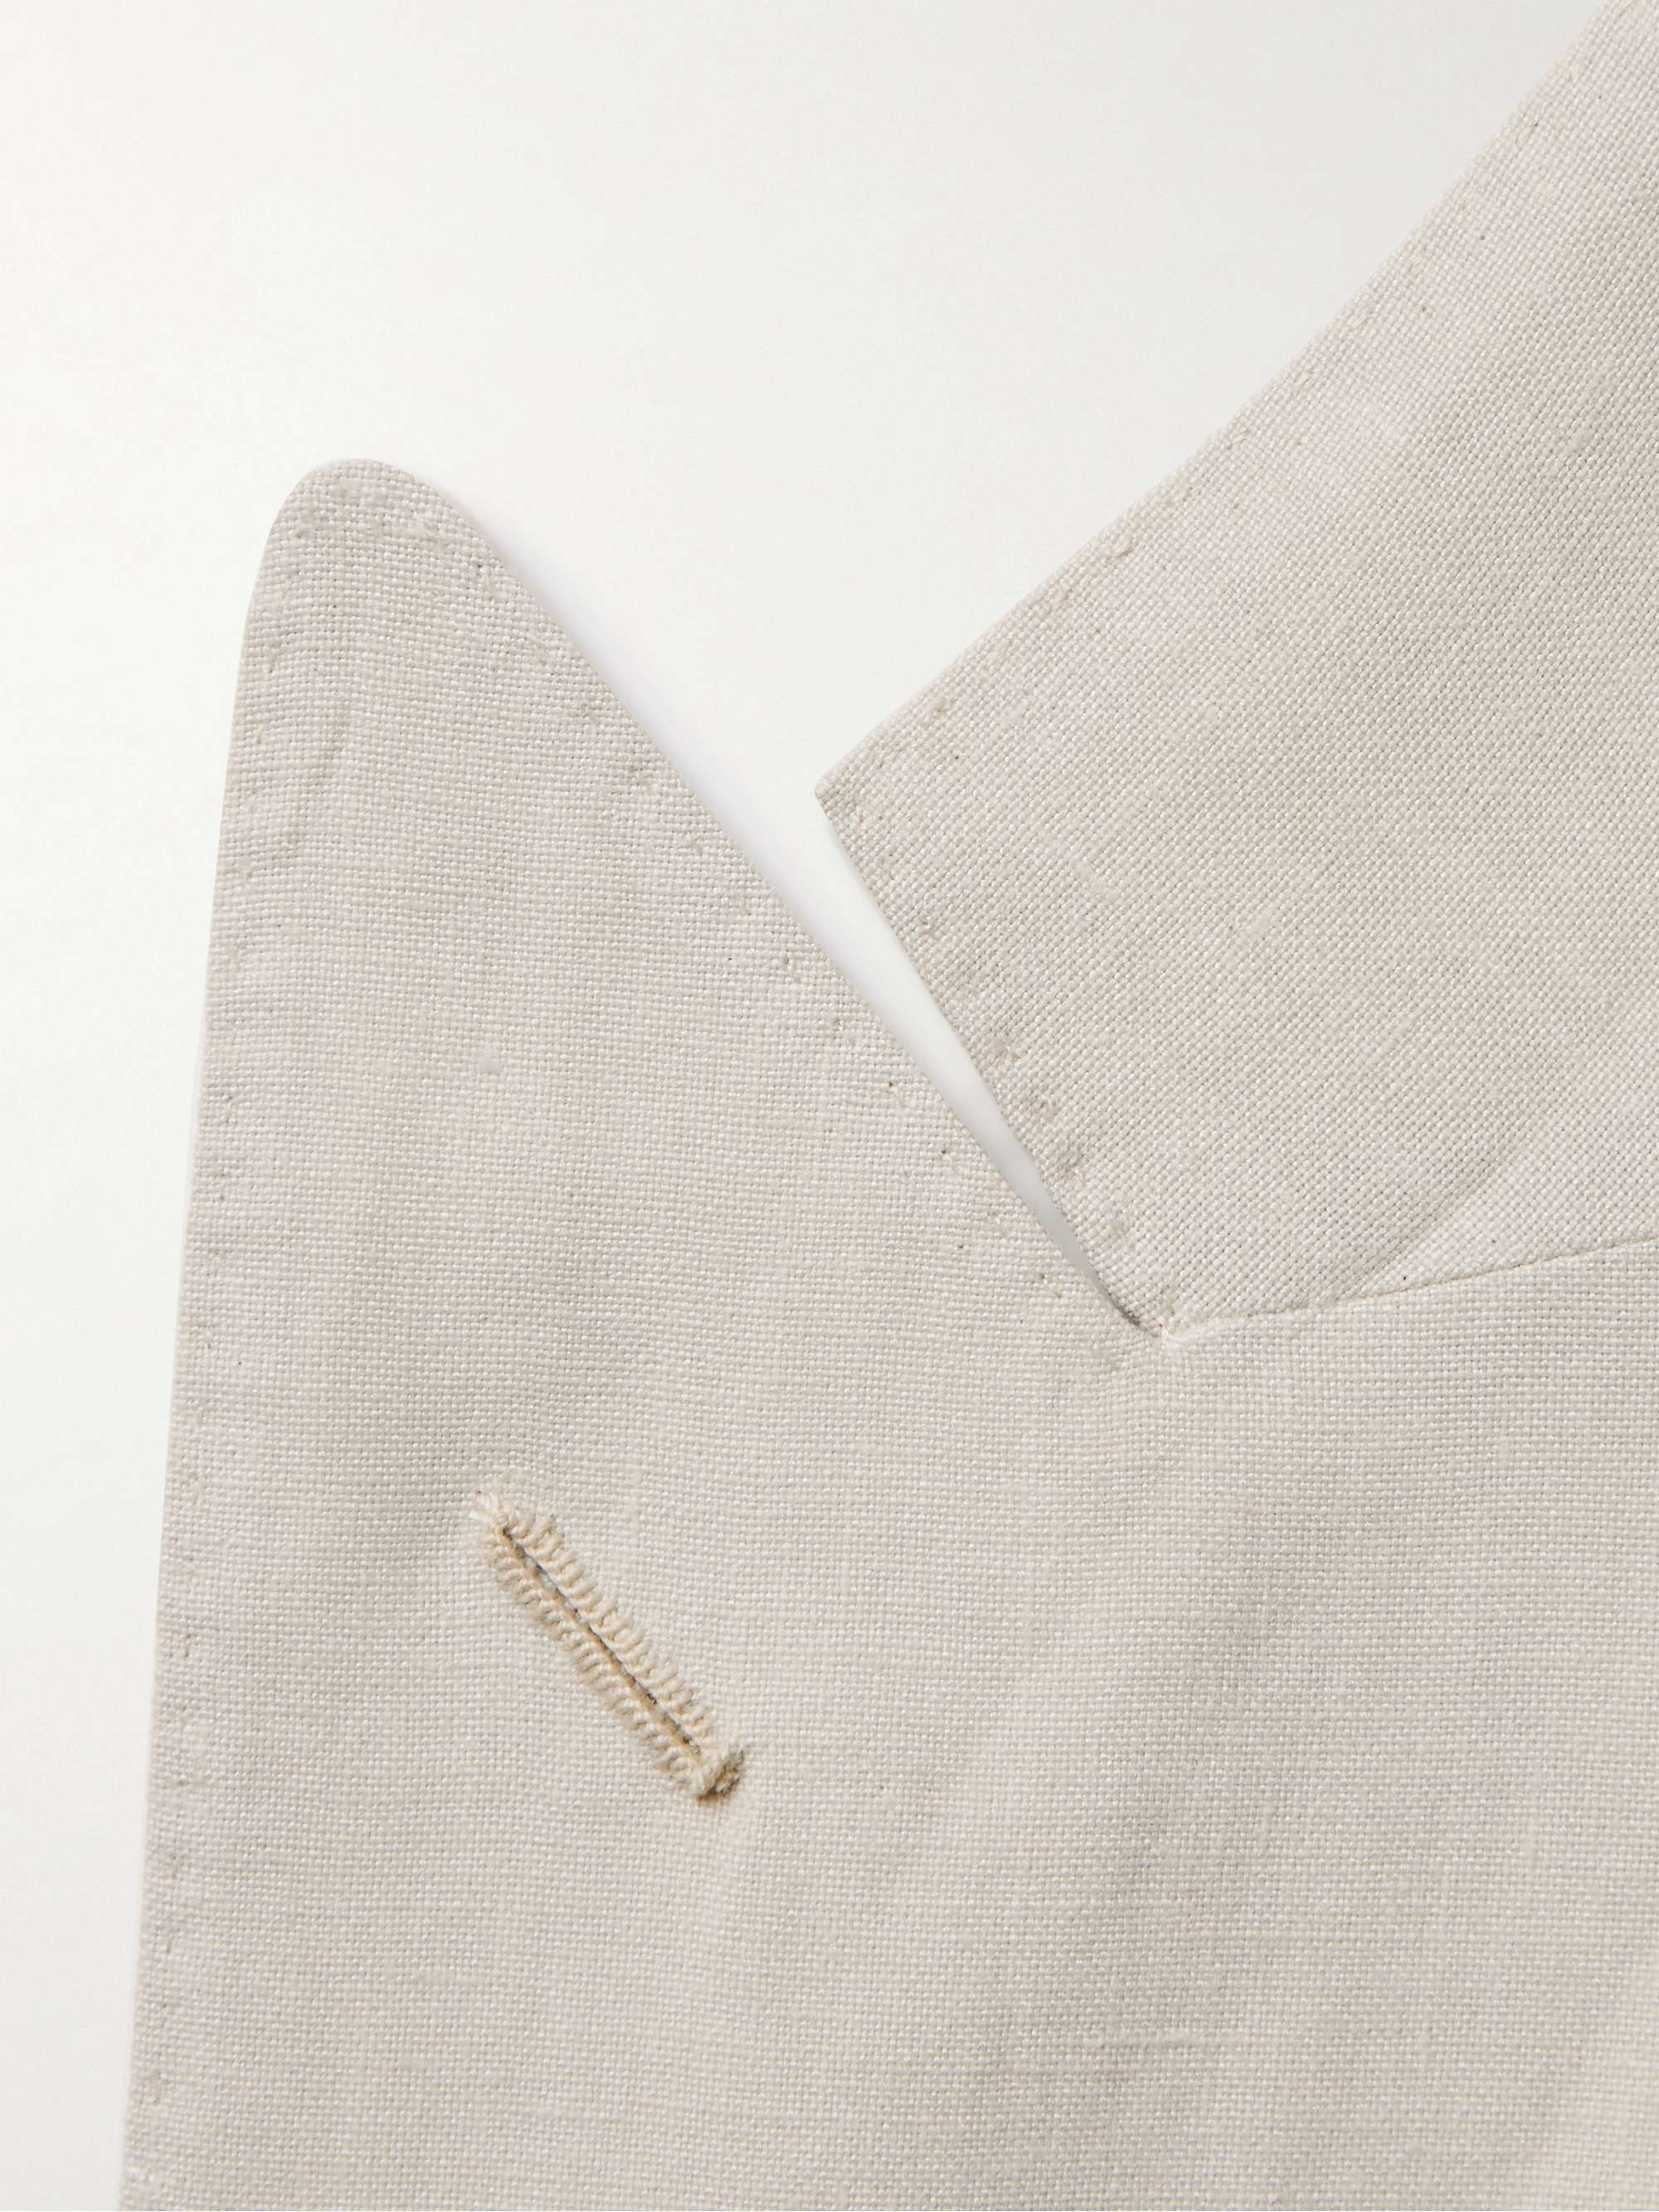 THOM SWEENEY Unstructured Double-Breasted Linen Blazer for Men | MR PORTER